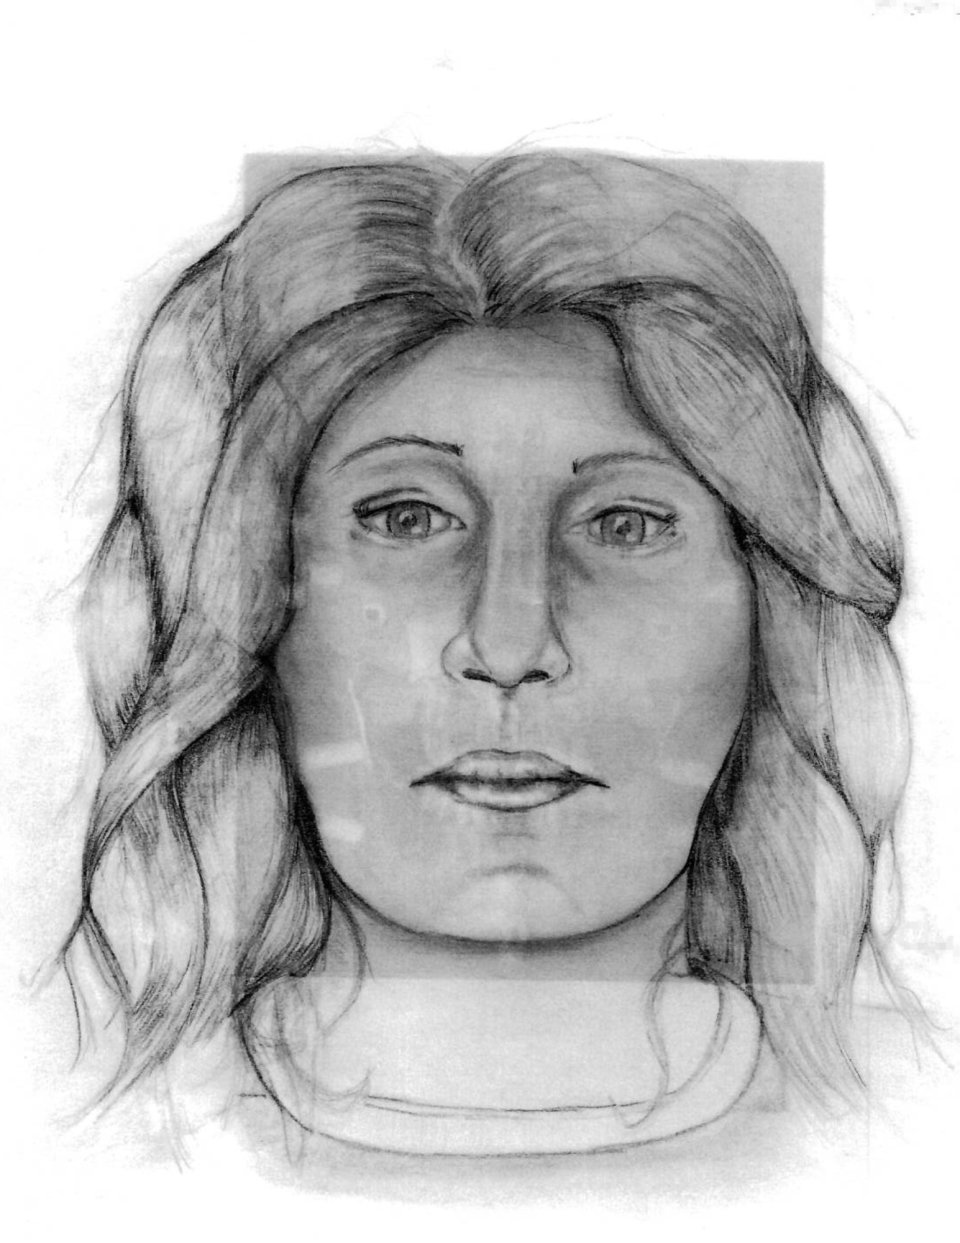 The Riverside County Sheriff's Office provided a sketch of the victim known as Claudia. Keith Hunter Jesperson, known as the Happy Face Killer, was convicted of her murder Jan. 8, 2010, but the victim was never formally identified.